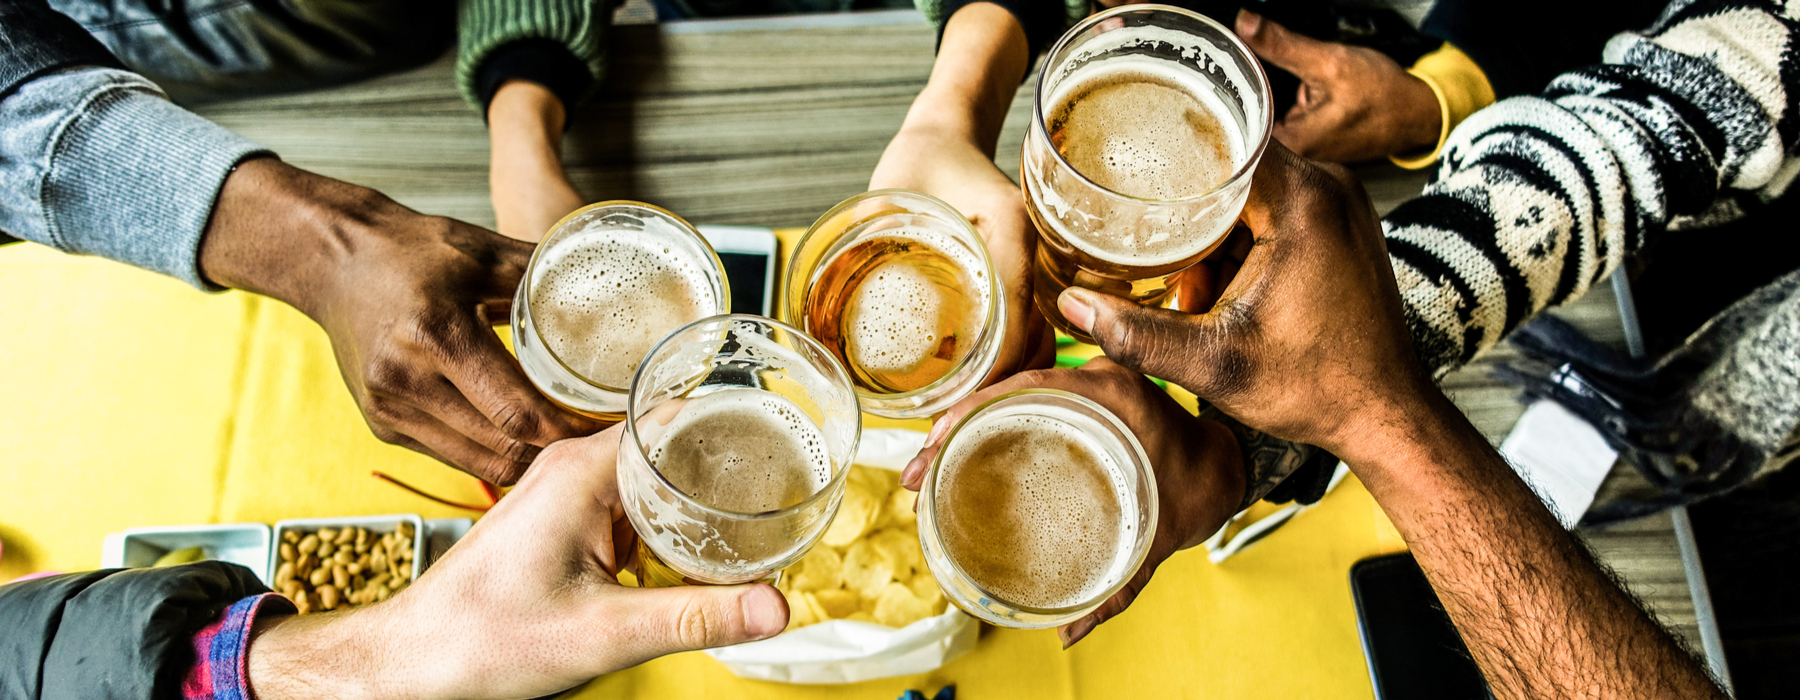 Group of people drinking beer at a pub.